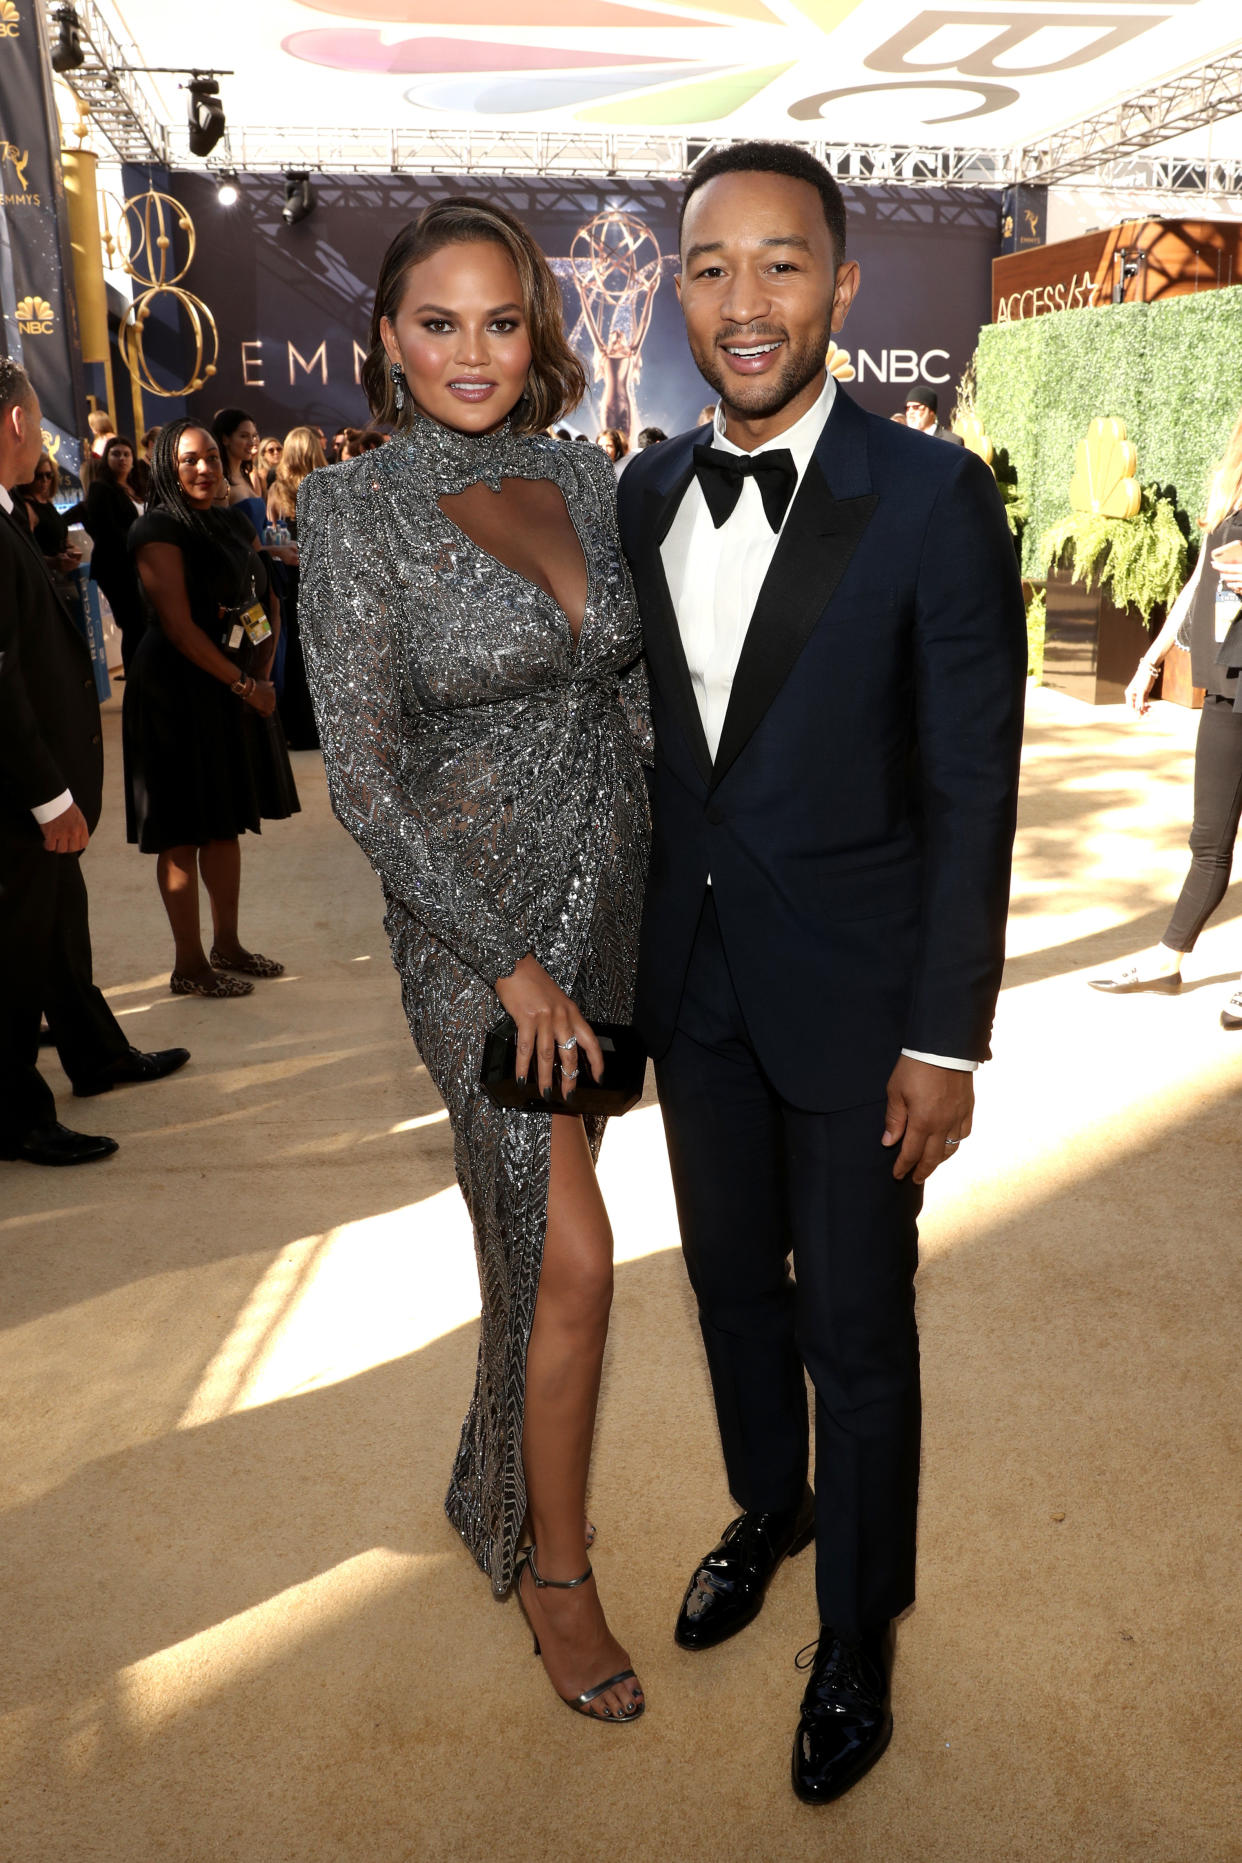 Chrissy Teigen and actor/singer John Legend arrive to the 70th Annual Primetime Emmy Awards. (Photo: Todd Williamson/NBC via Getty Images)